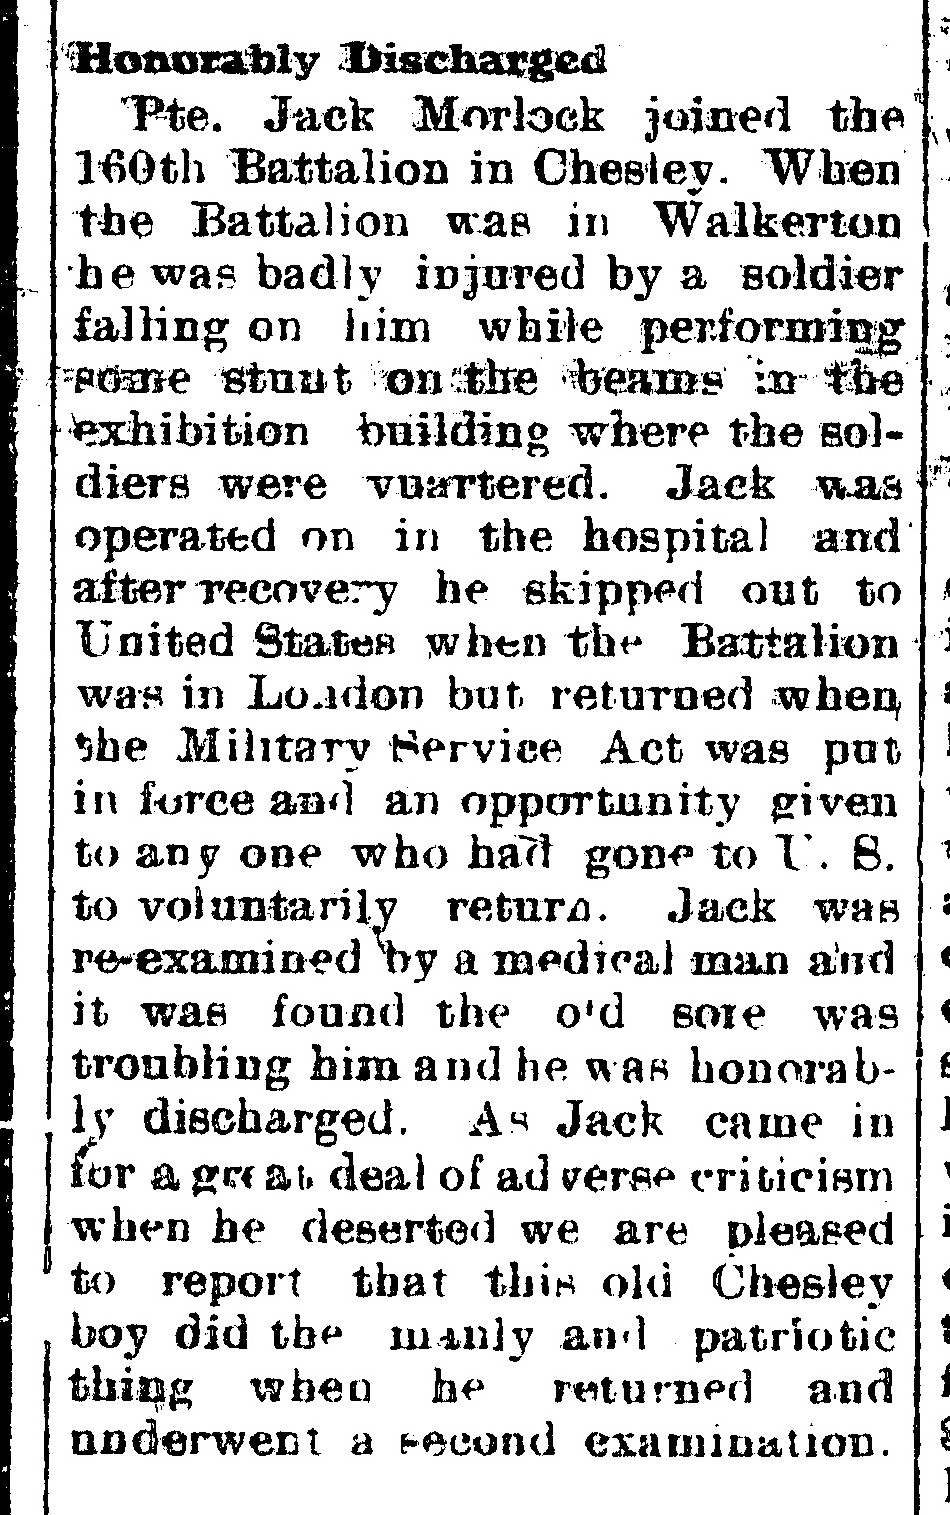 The Chesley Enterprise, May 2, 1918